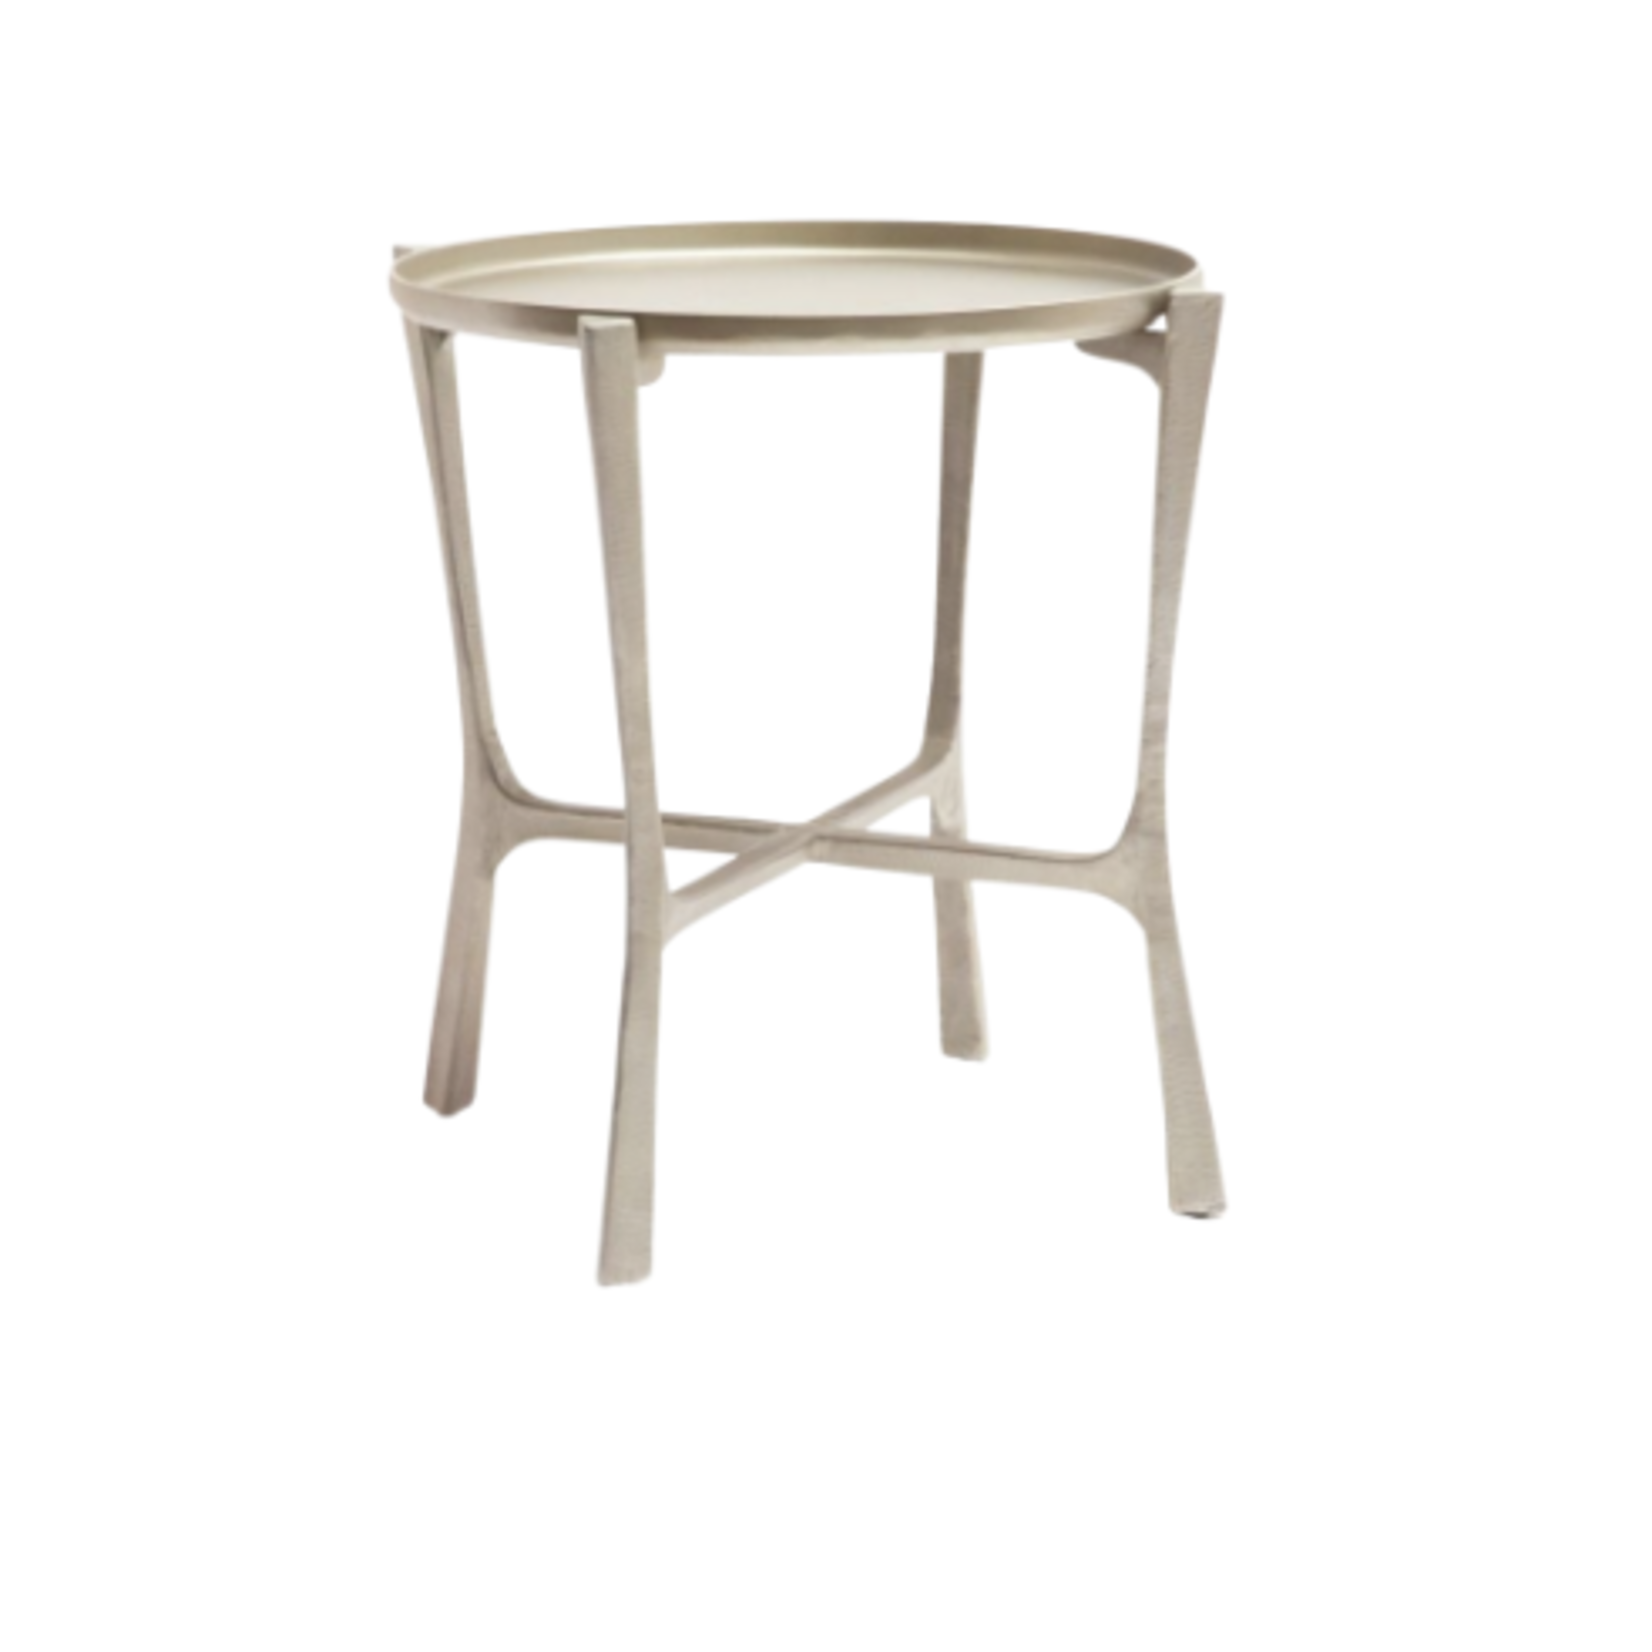 Made Goods Addison Large Side Table, Aged Silver Iron